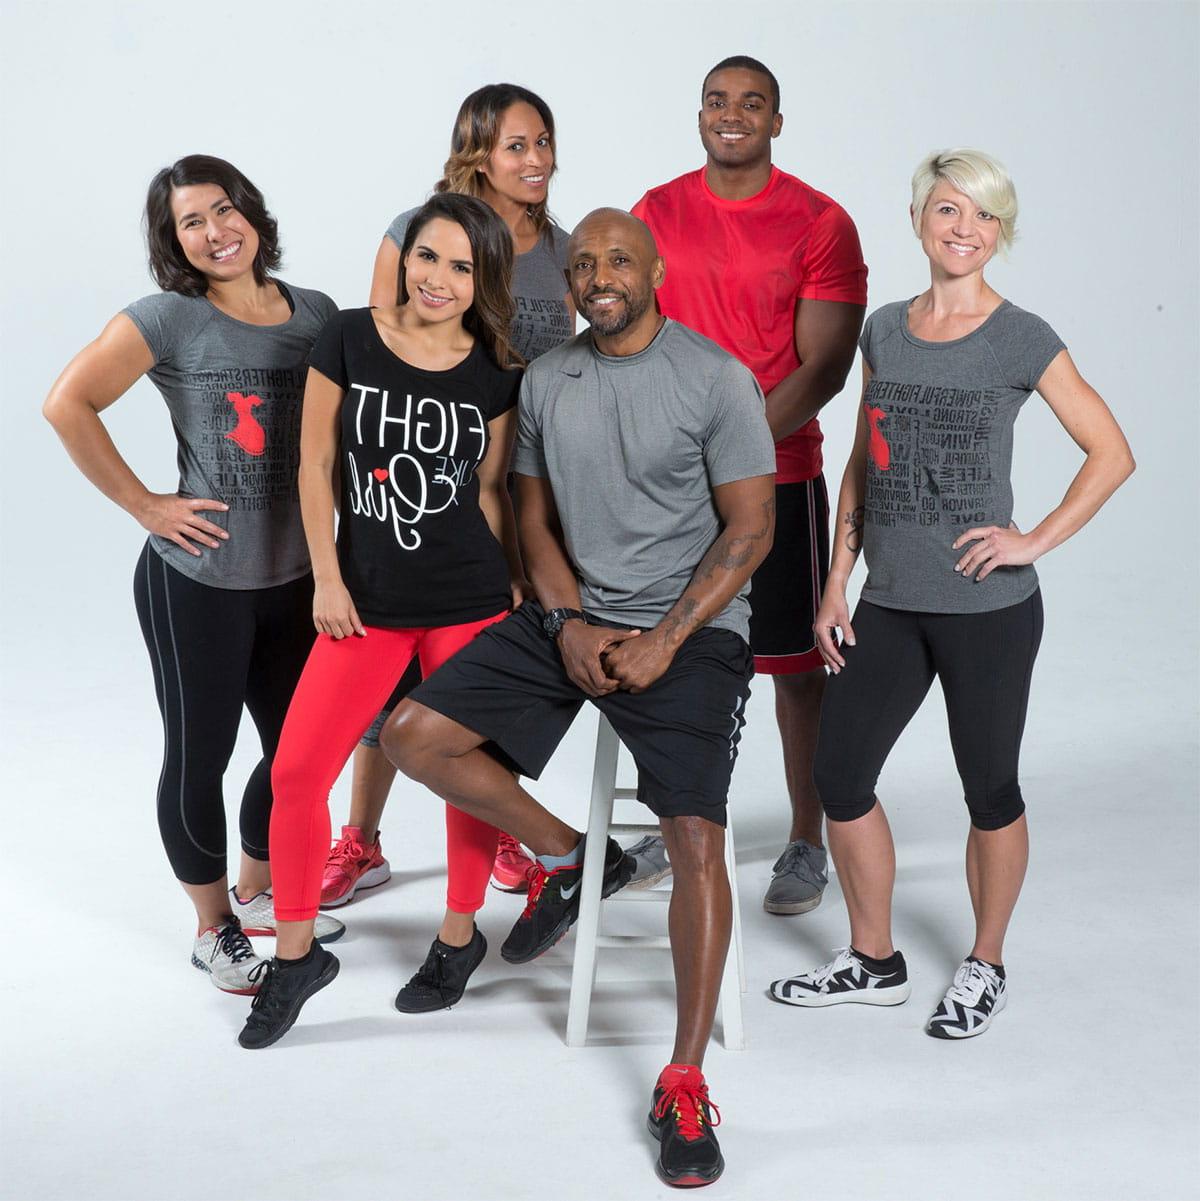 Group portrait of diverse adults in athletic attire